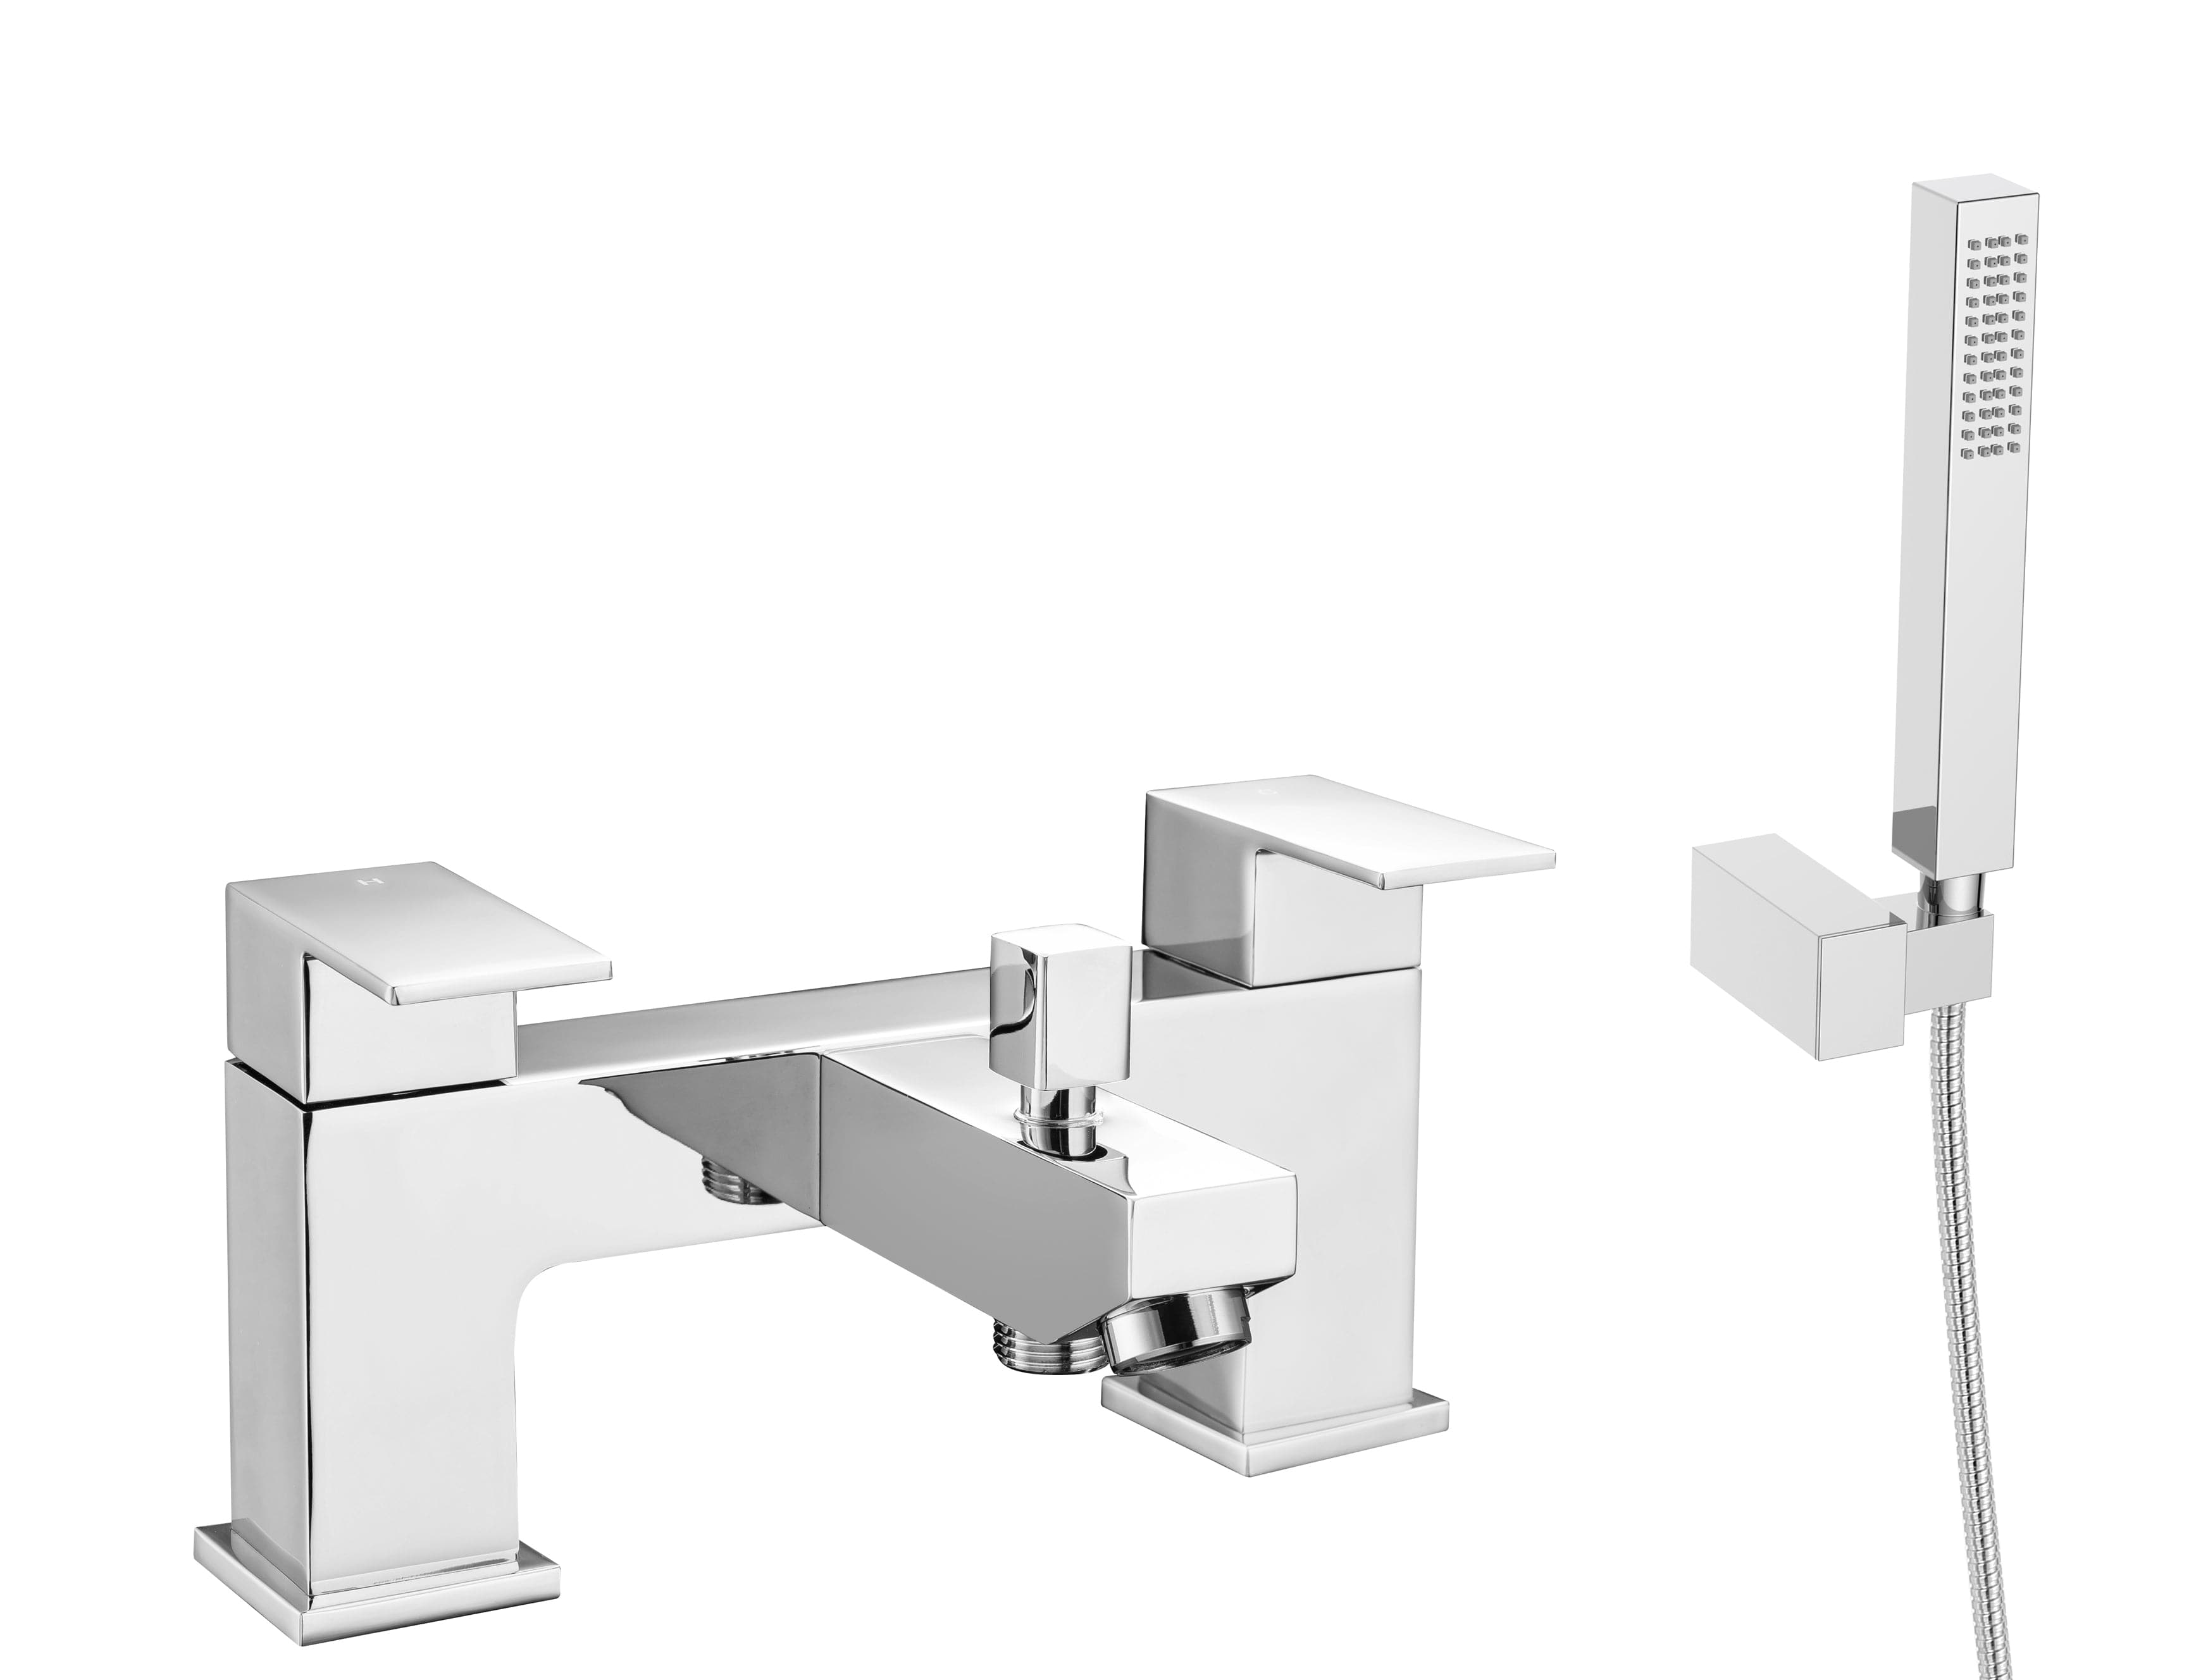 Munro Bath Shower Mixer Tap with Kit in Chrome - Stylish, modern design perfect for contemporary UK bathrooms, featuring easy installation and high-quality finish.